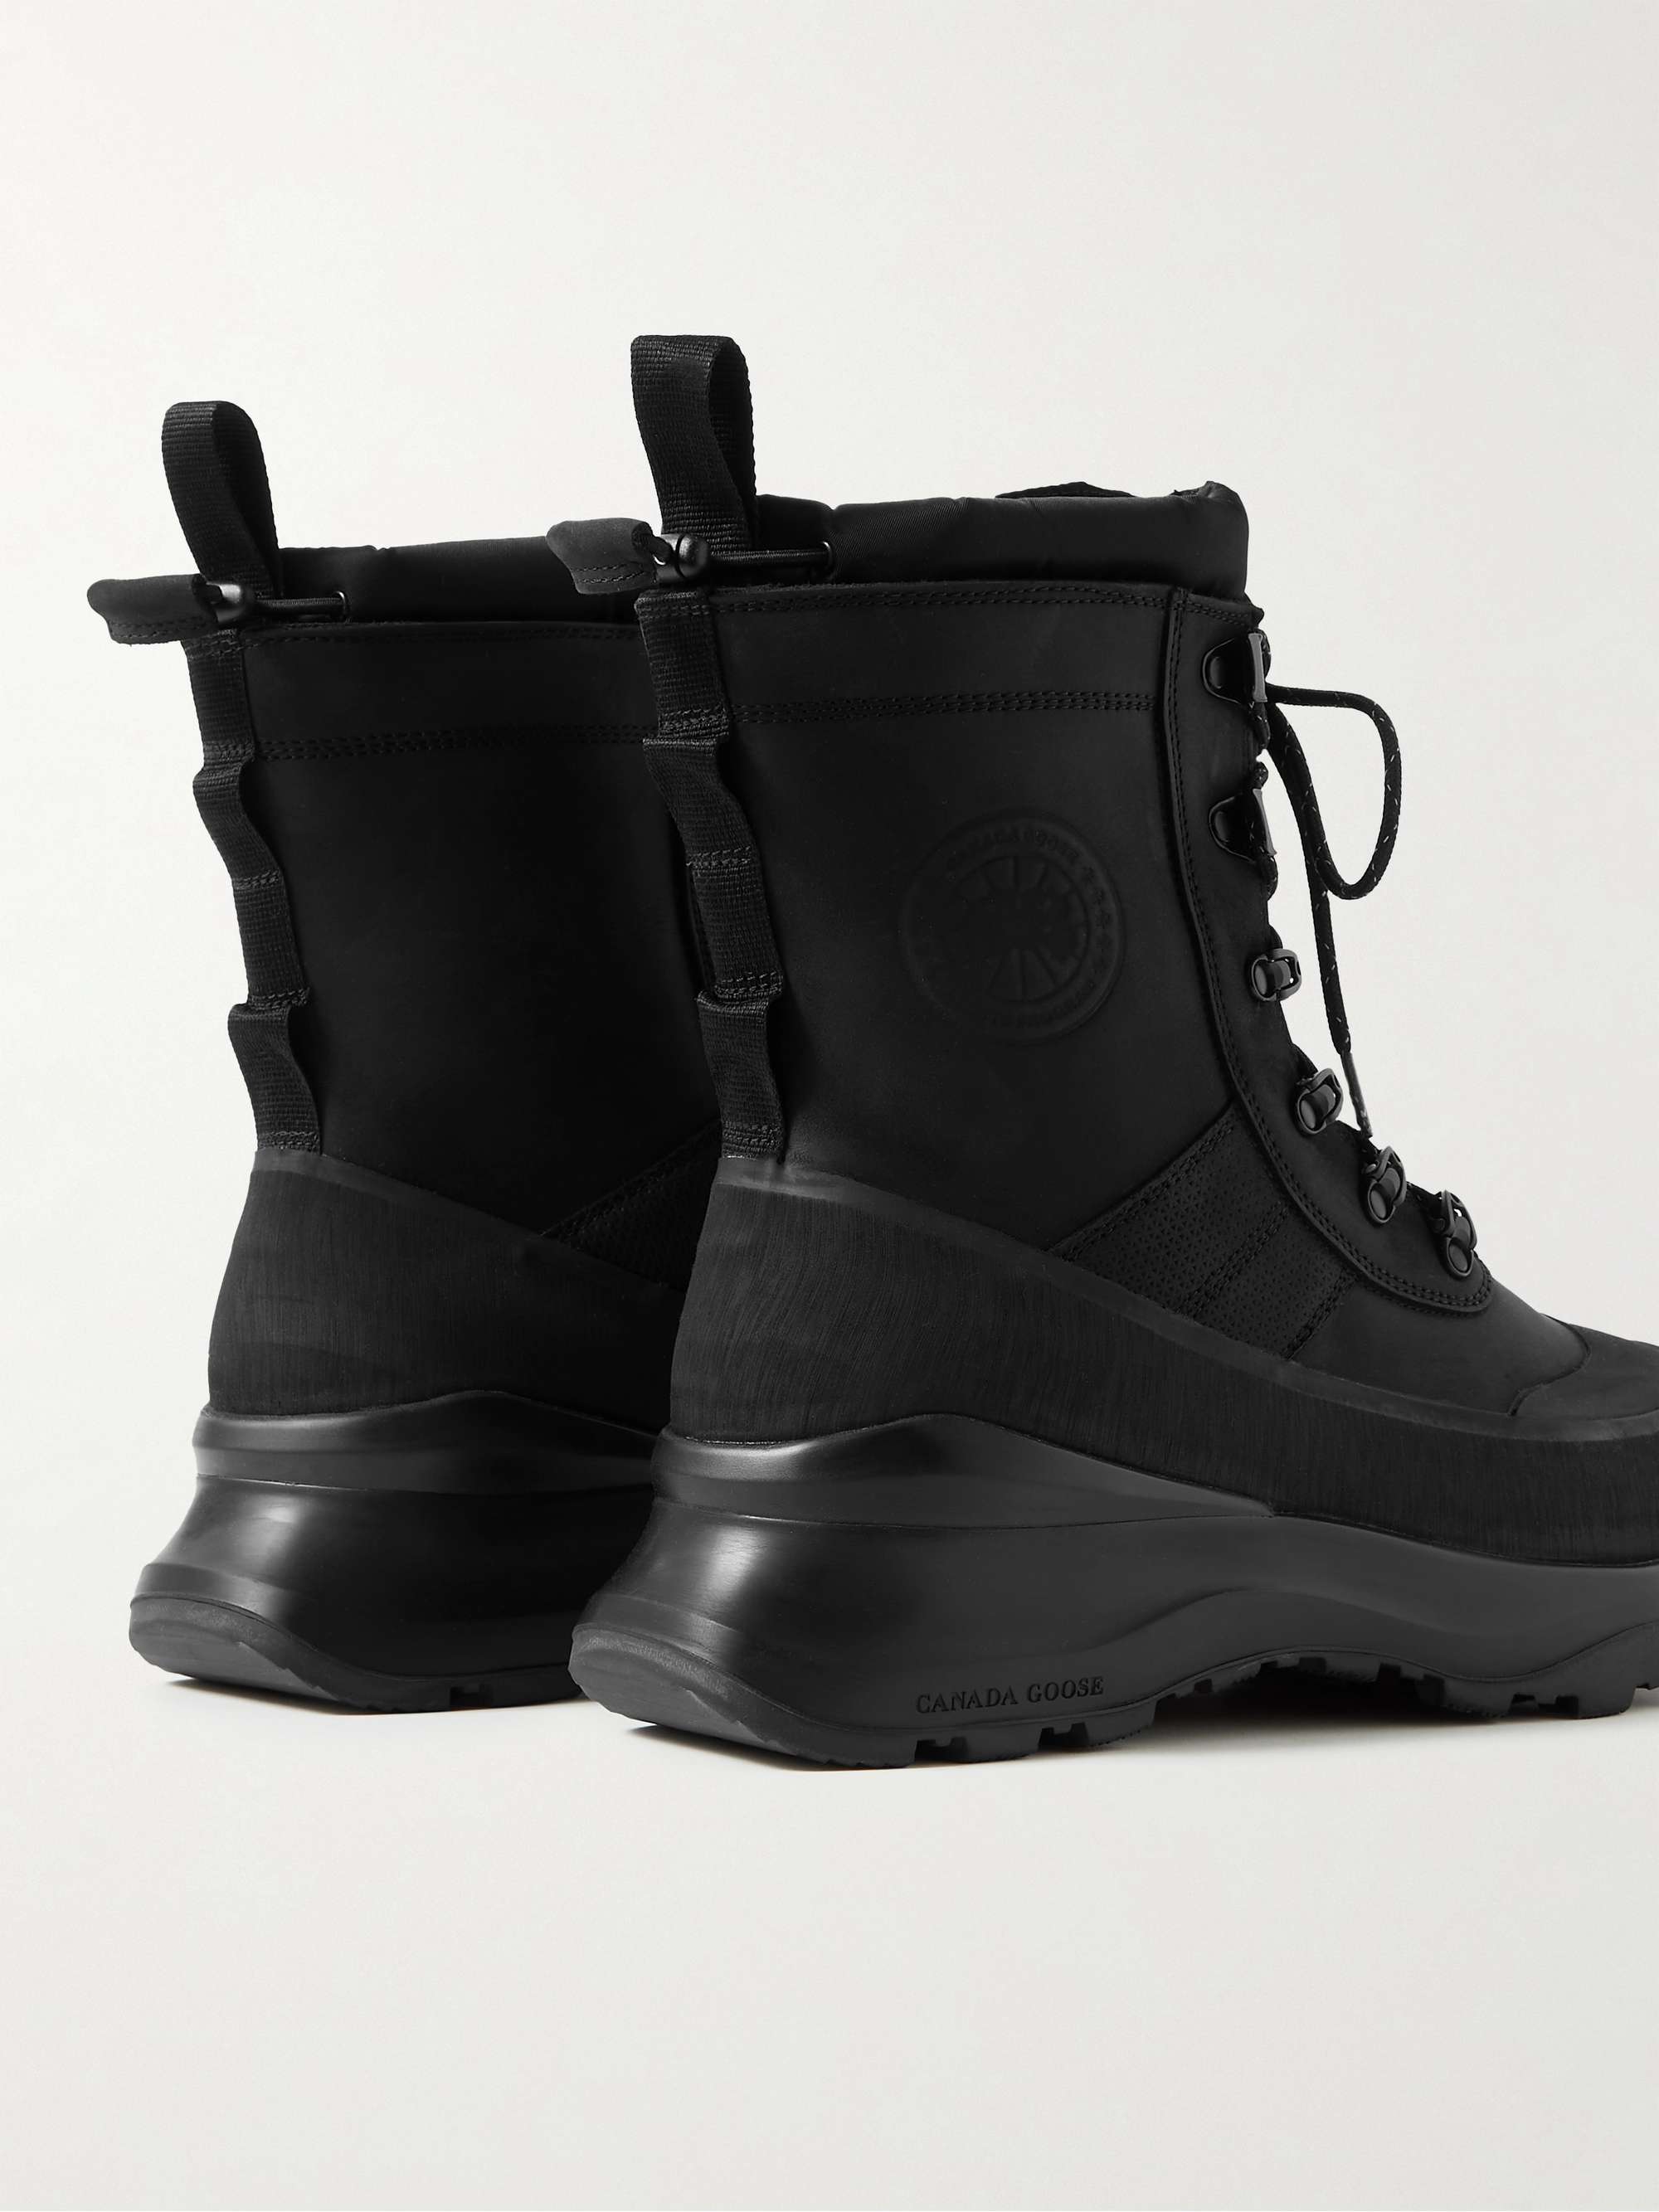 CANADA GOOSE Armstrong Rubber-Trimmed Nubuck Boots